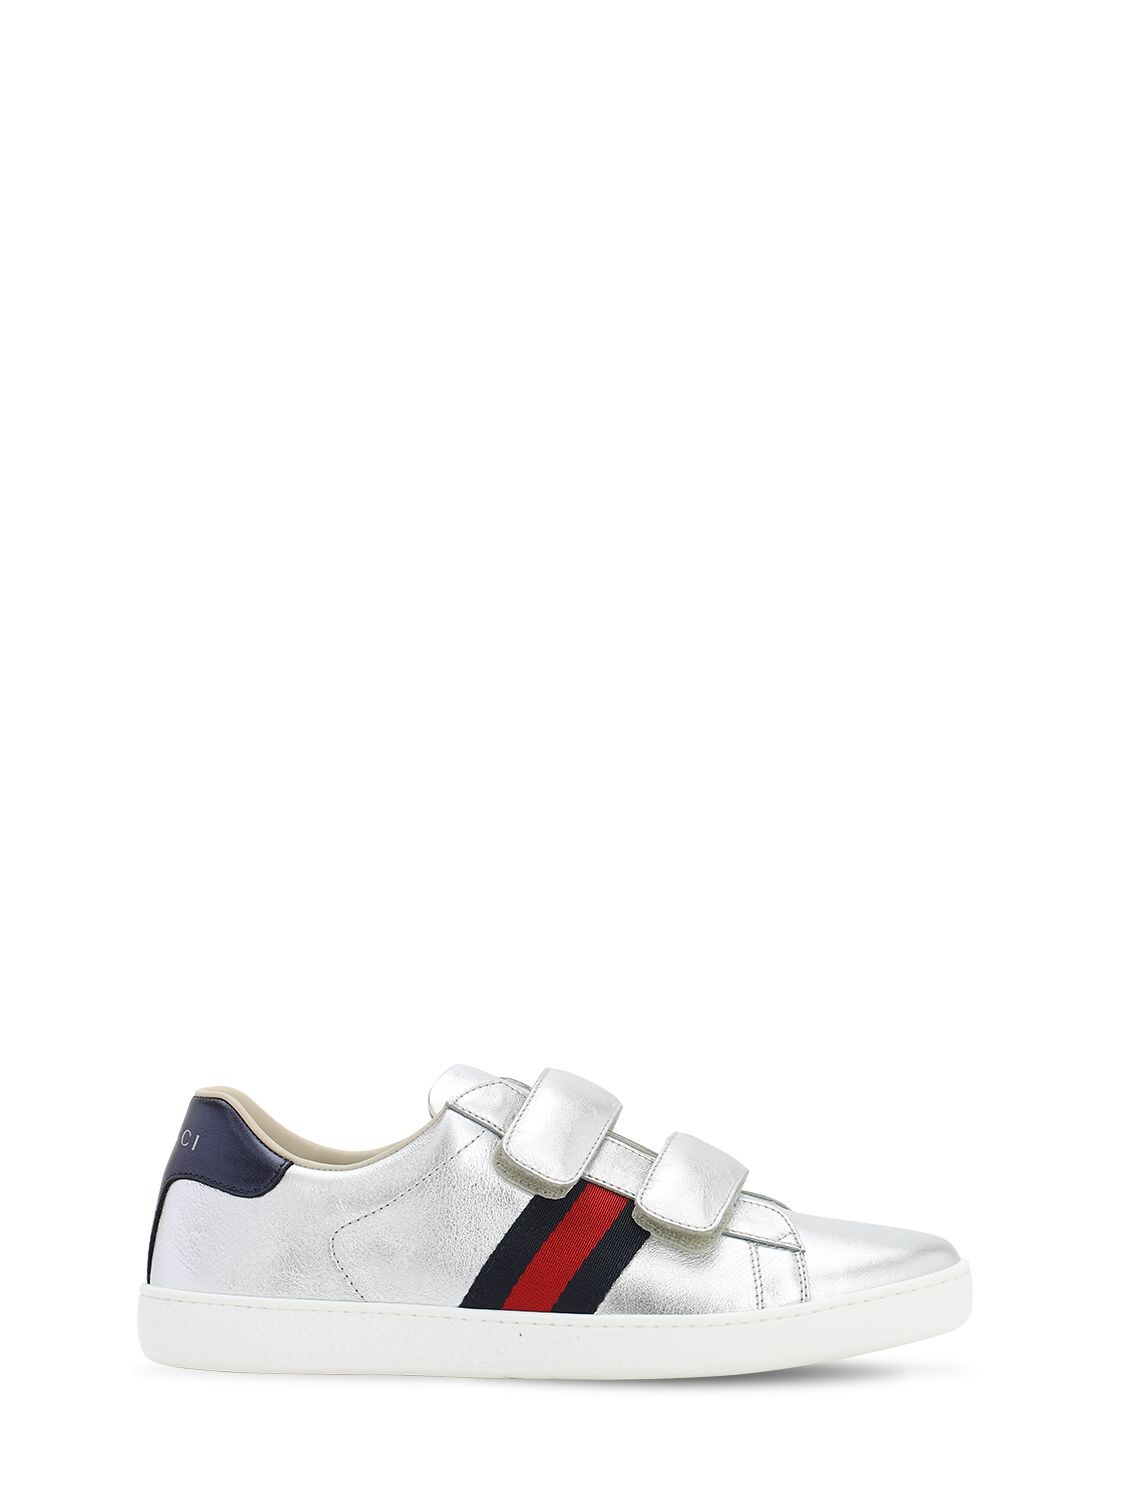 GUCCI LEATHER STRAP SNEAKERS,72ILXP015-ODE3MG2